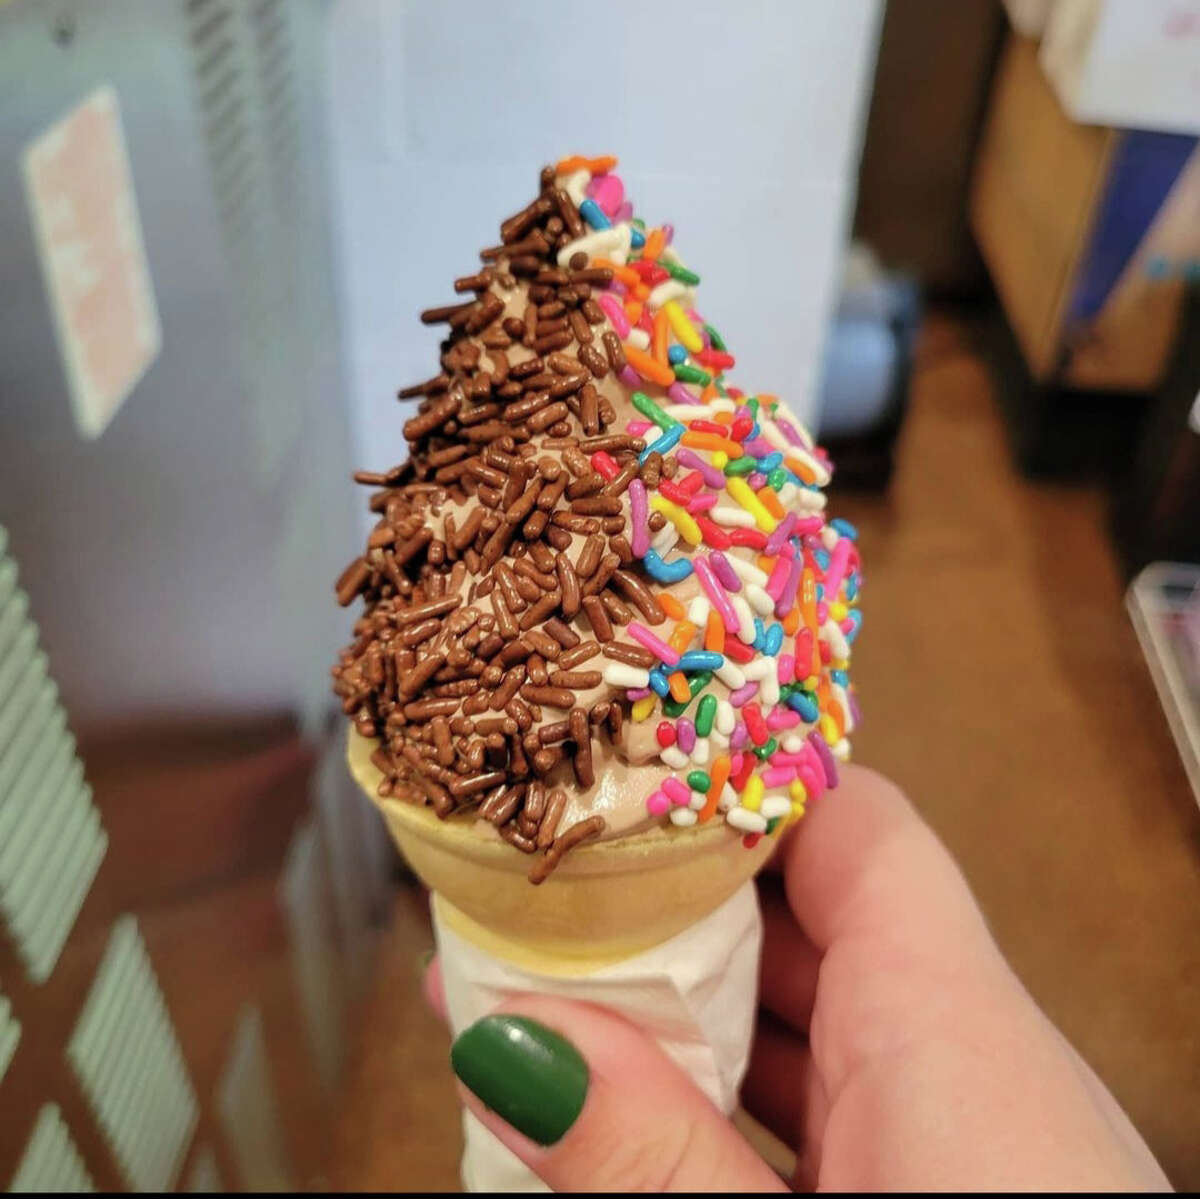 A hand is holding an ice cream cone. The ice cream is vanilla and is covered with chocolate sprinkles on the left side and rainbow sprinkles on the right side.